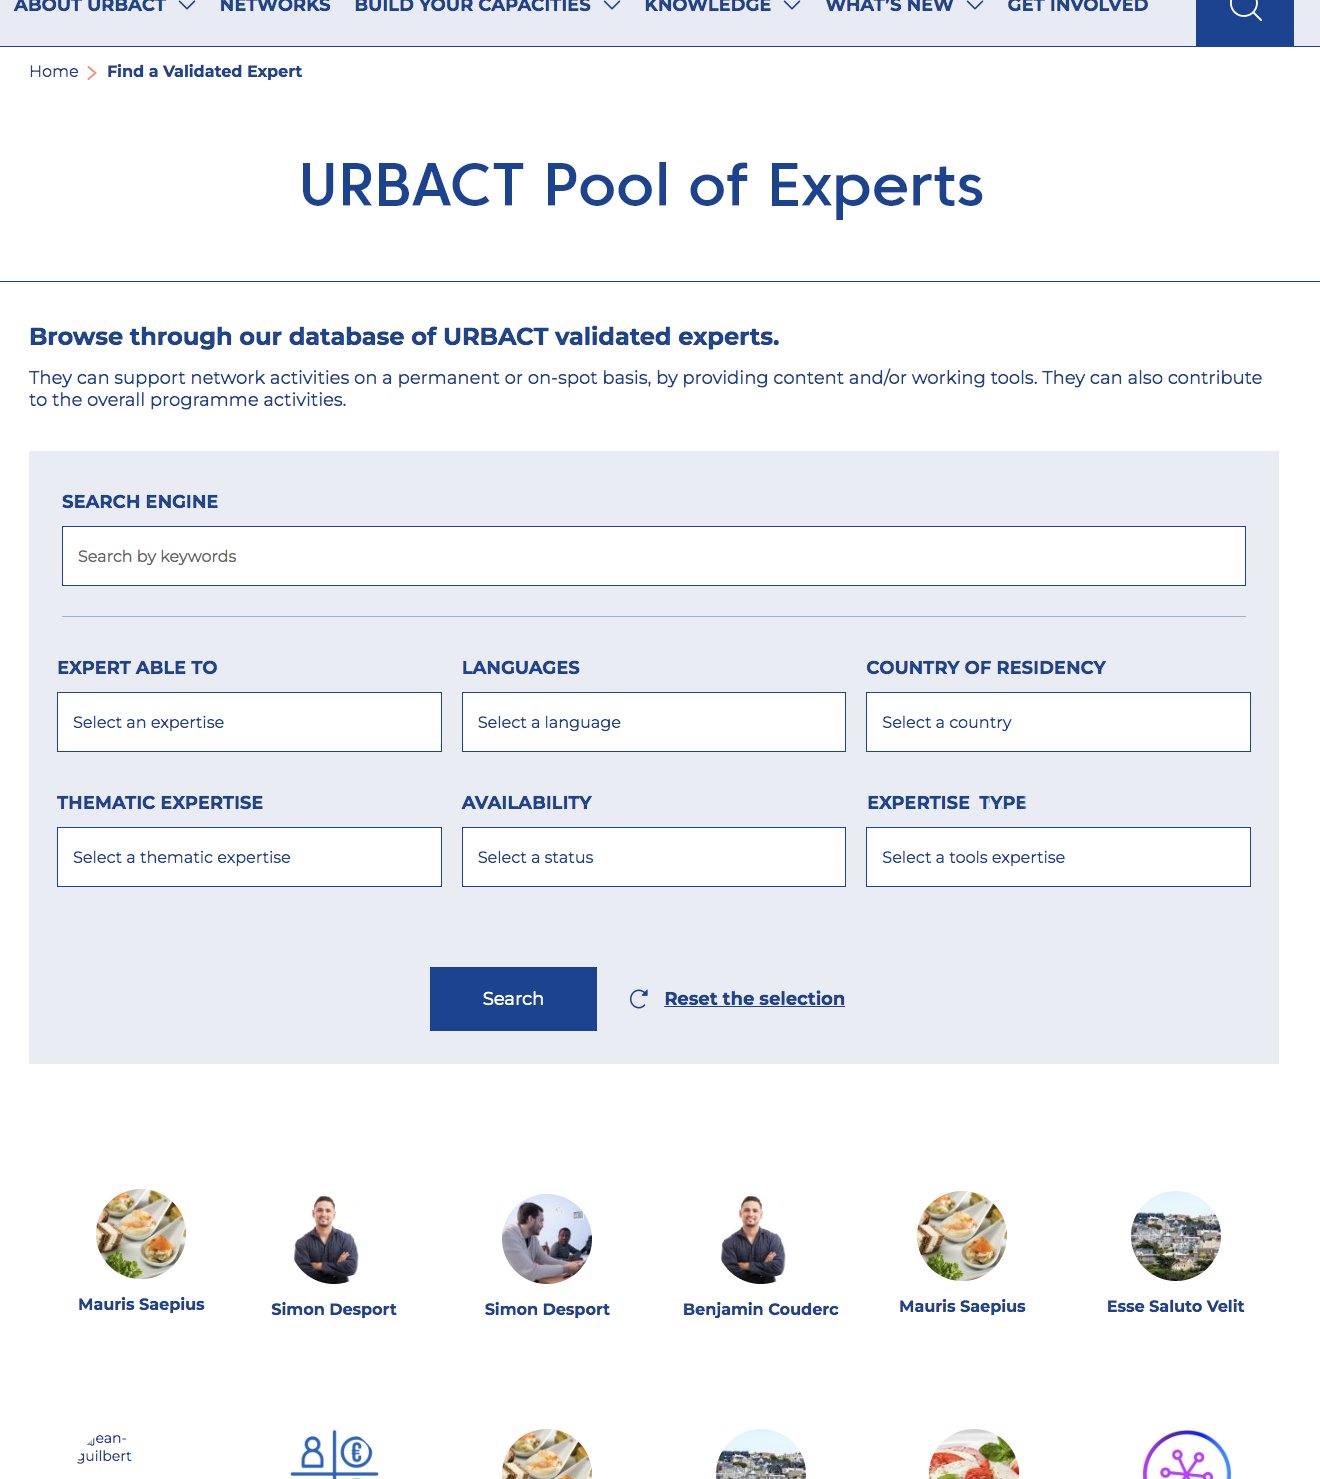 URBACT Pool of Experts